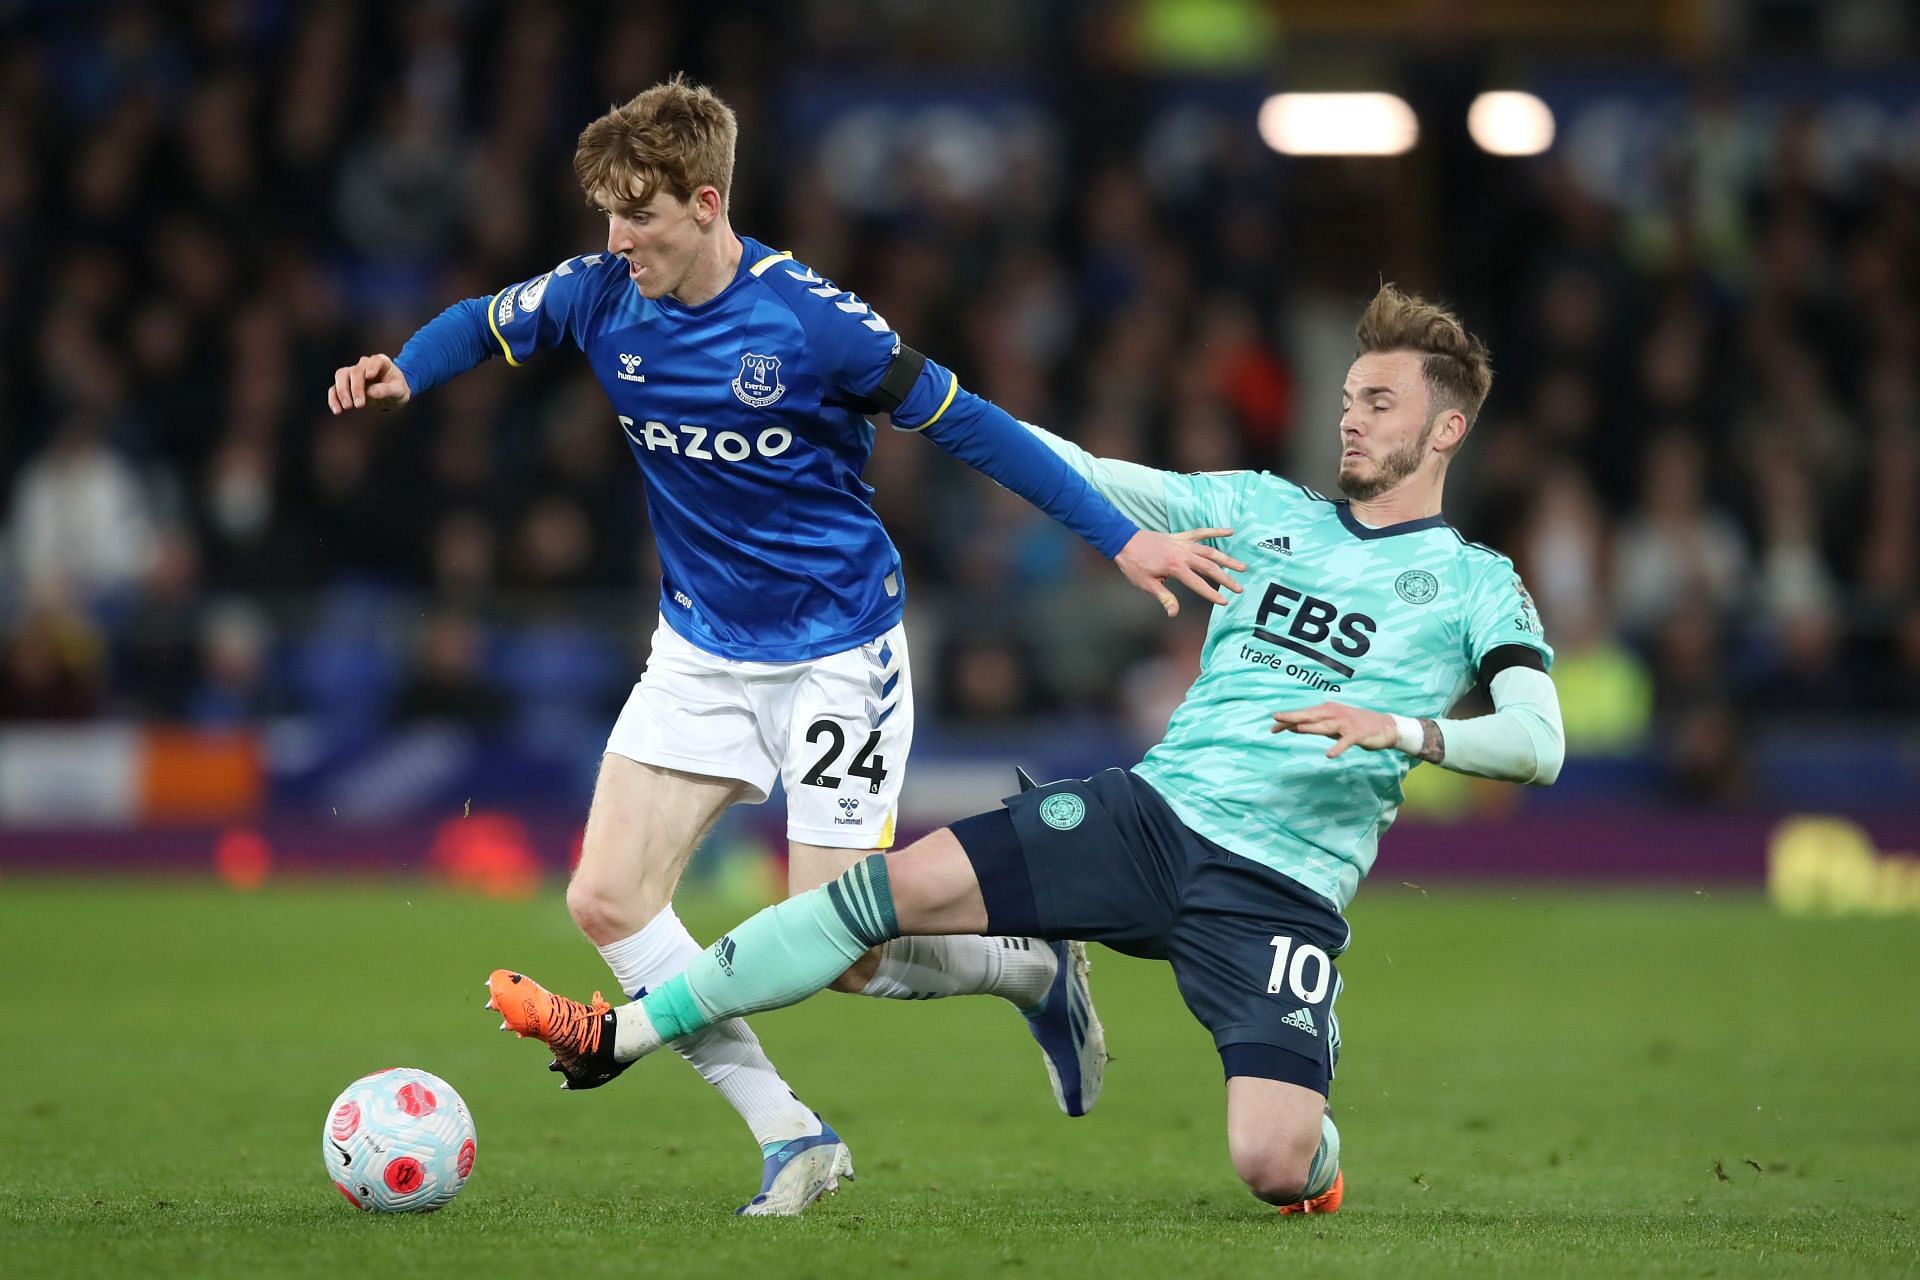 Leicester City vs Everton Prediction and Betting Tips - 8th May 2022